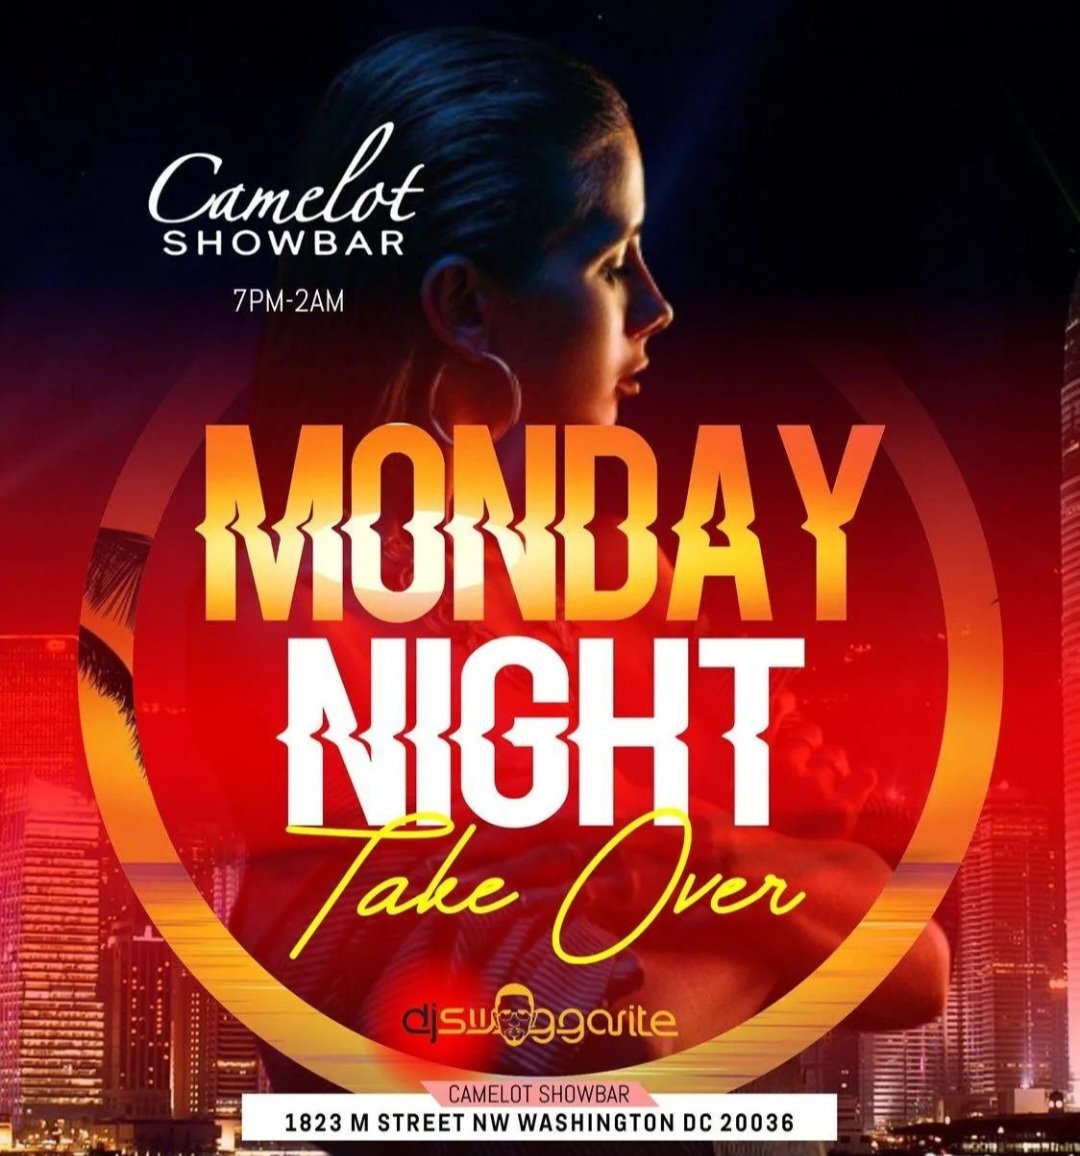 Best Monday Night Party In The DMV At The  Camelot Showbar!!! DJ Swaggarite Will Be In The Building Keeping The Vibes Right!!!
#mondayvibes #takeover #dj  #dcclubbing  #DCNightClubs #exoticdancers #beauty #georgetown #dupontcircle #capitolhill #VIP #vipexperience #BOTTLESERVICE